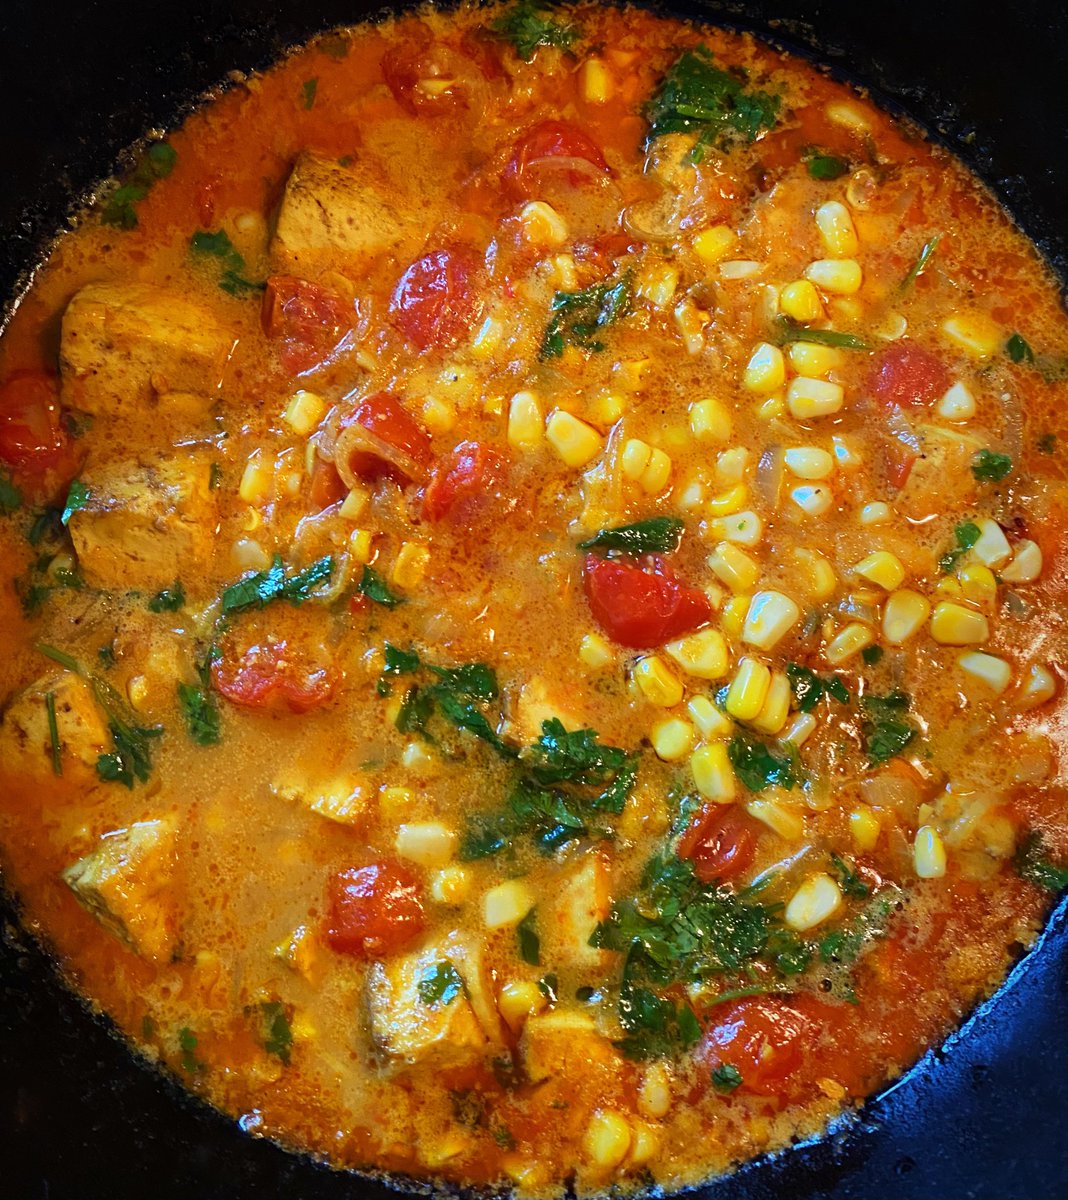 Last night’s Tofu Curry & Roasted Vegetables, a new recipe for me. Excellent. Served more soup-like with bread or, in our case, on a bed of quinoa. All of us loved it.

From takenrecipes.com. 

#vegan #dinner #tofu #curry #Veganuary #GoVegan